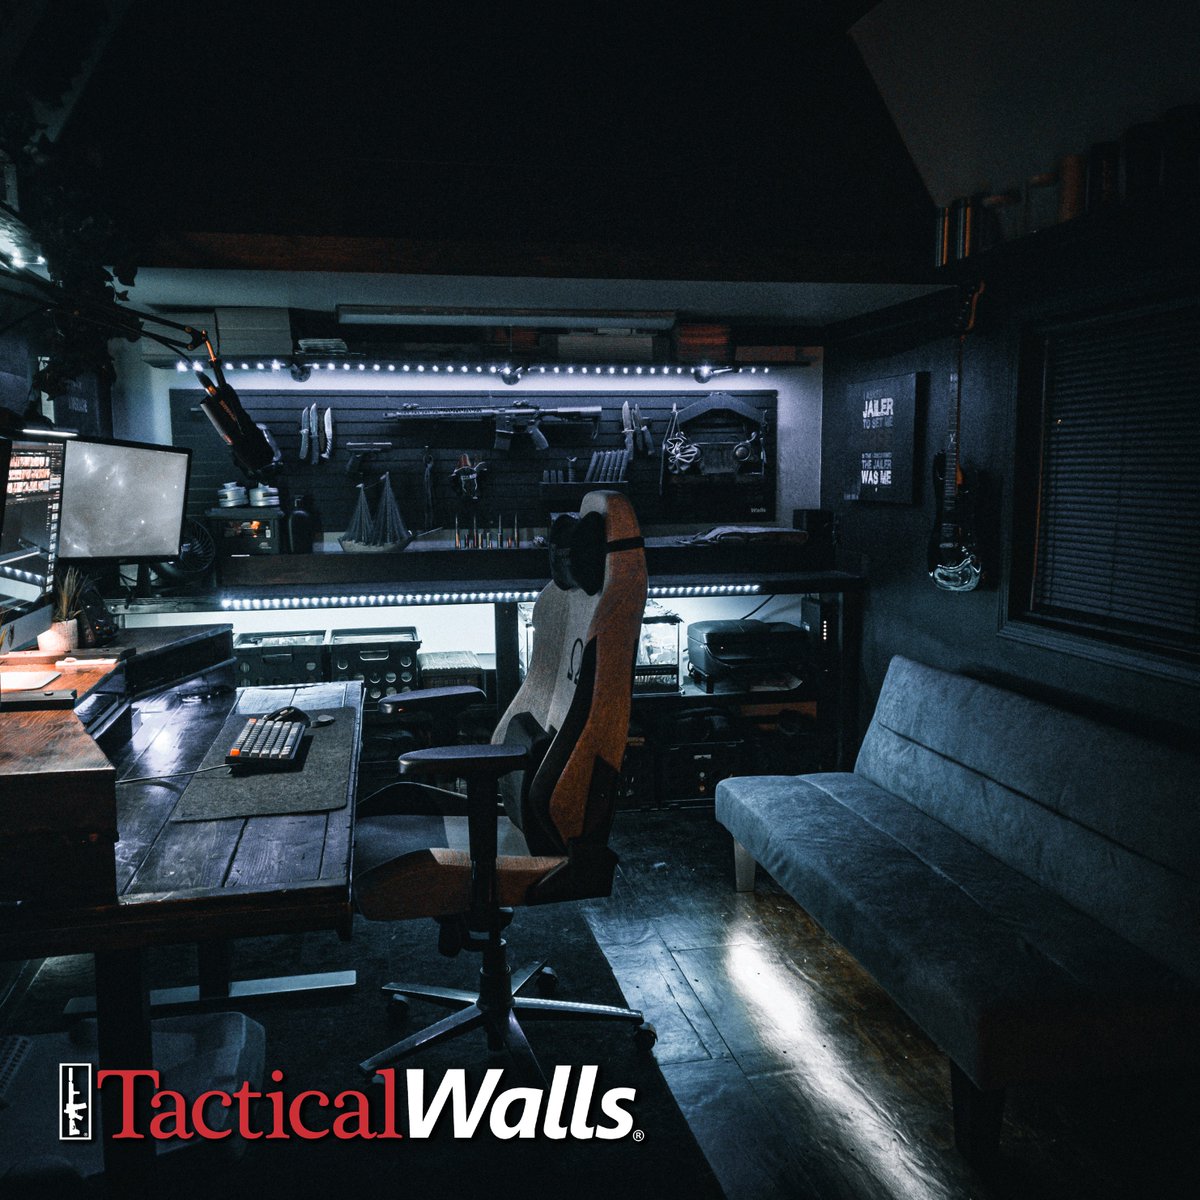 Mancave goals! 😍  Want to start your own? Reach out to us: tacticalwalls.com/tactical-walls…
#modwall #mancave #vaultroom #gunroom #rifles #officespace #pistols #tacticalwalls #madeinamerica